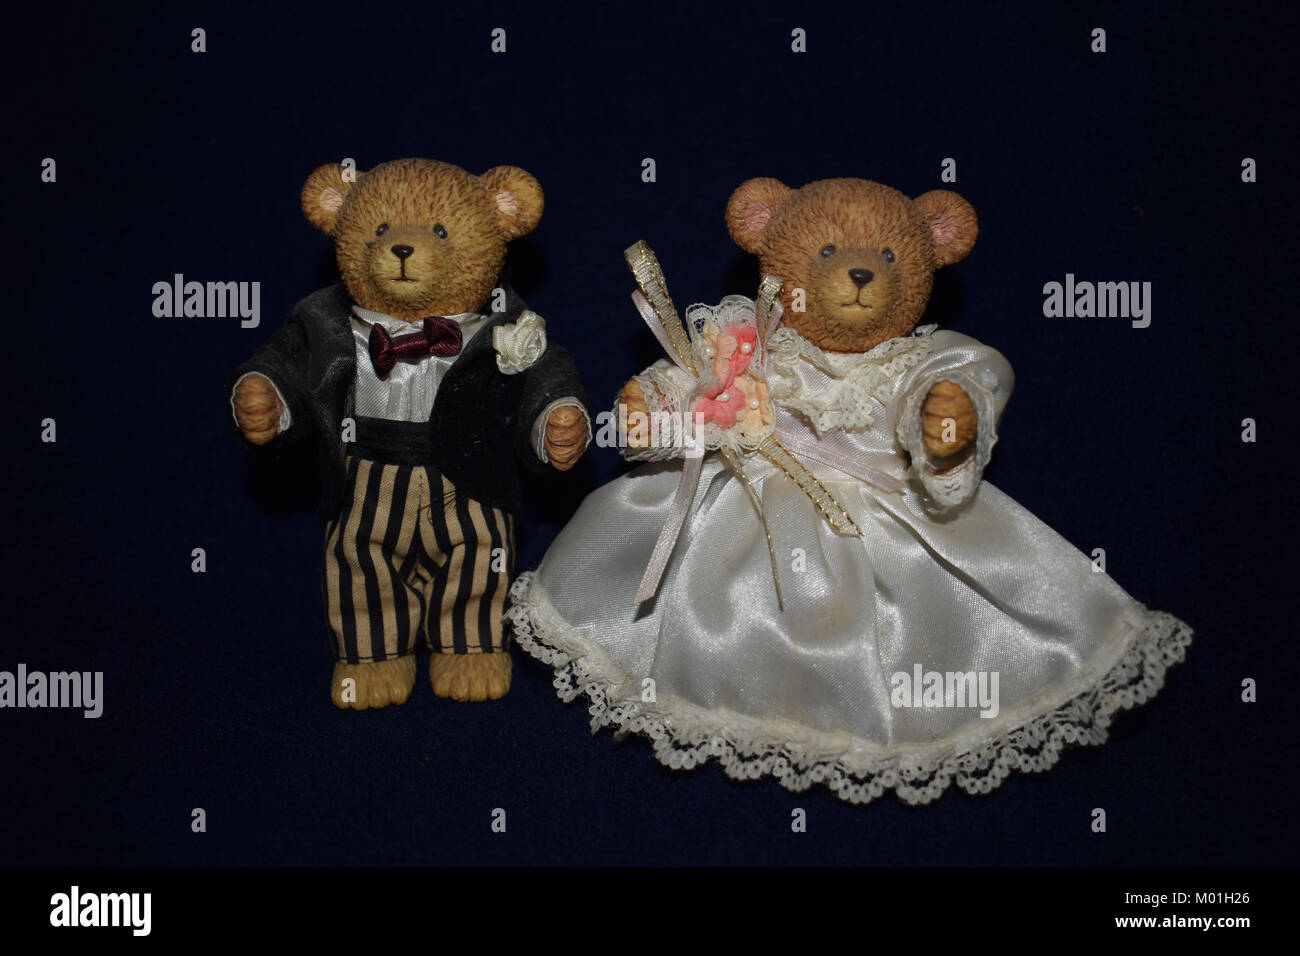 Cherished Teddies Boy and Girl holding bibles